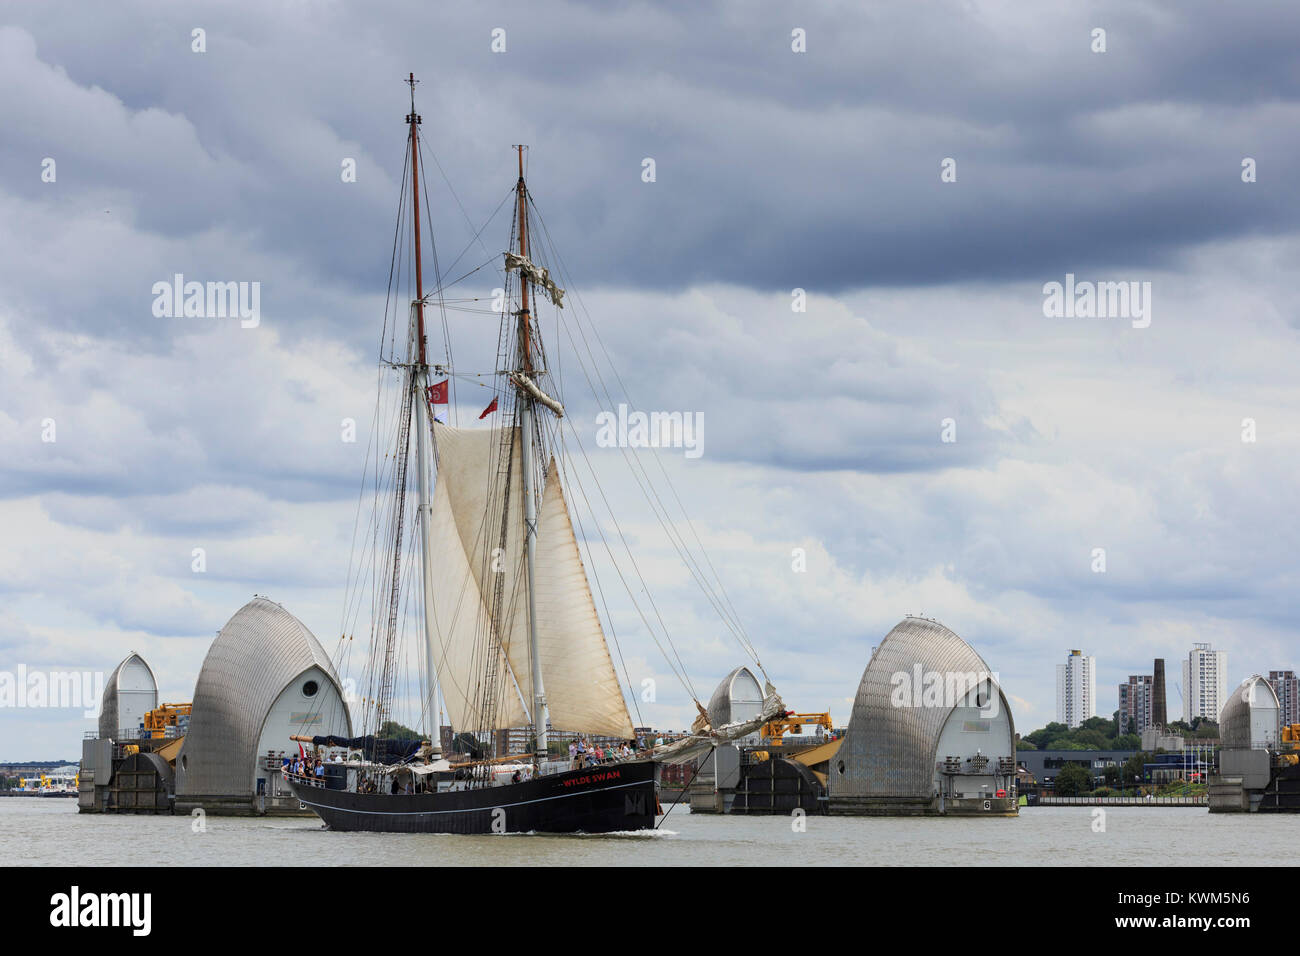 Top sail schooner Wylde Swan passes the Thames Barrier on the River Thames on the first day of the Tall Ships Festival 2015. Stock Photo